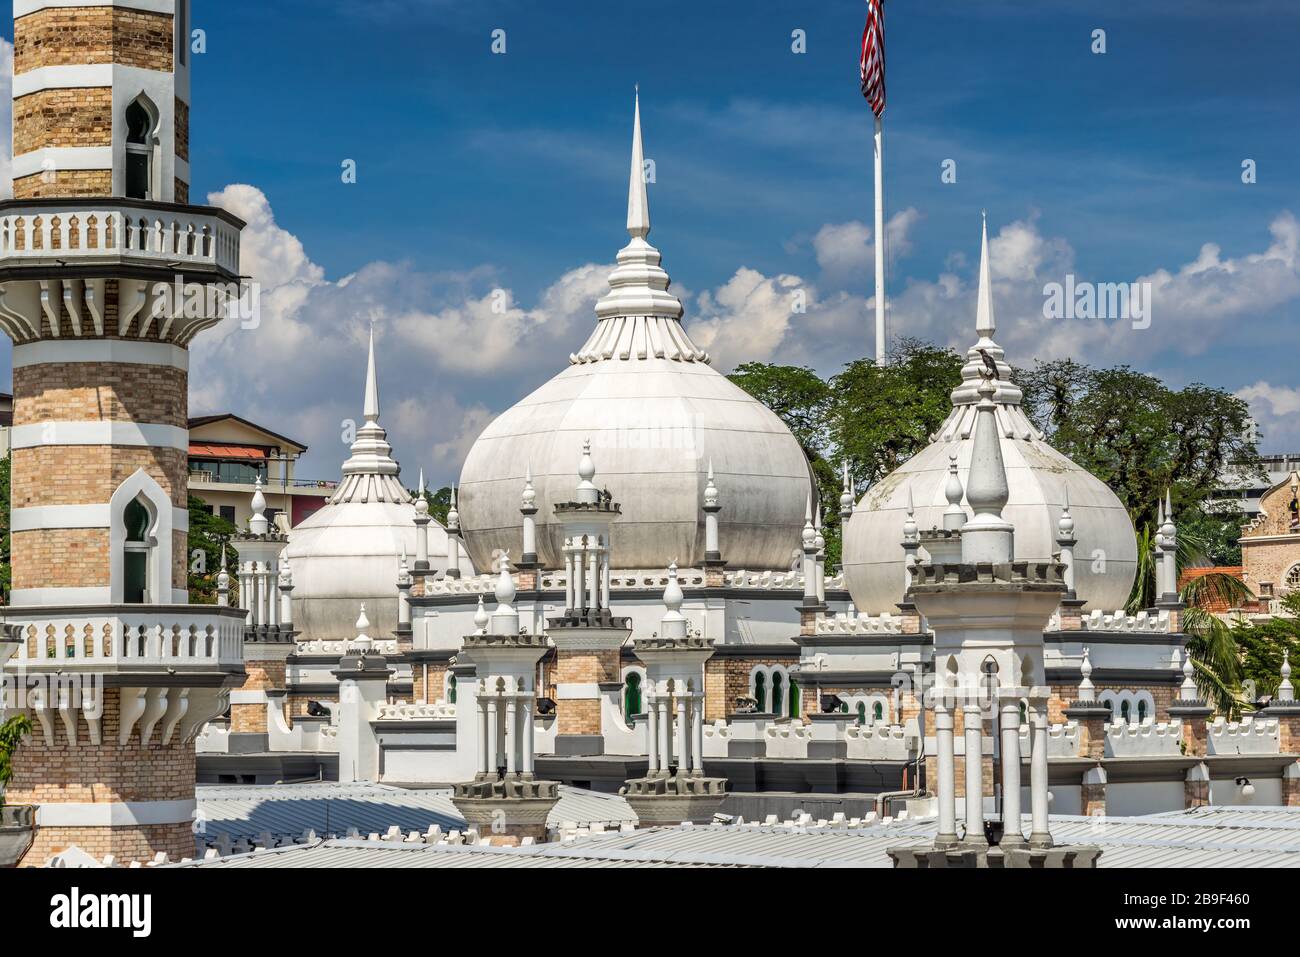 Masjid Jamek Mosque. Located in the heart of Kuala Lumpur at the confluence of the Klang and Gombak River. Kuala Lumpur, Malaysia. Stock Photo